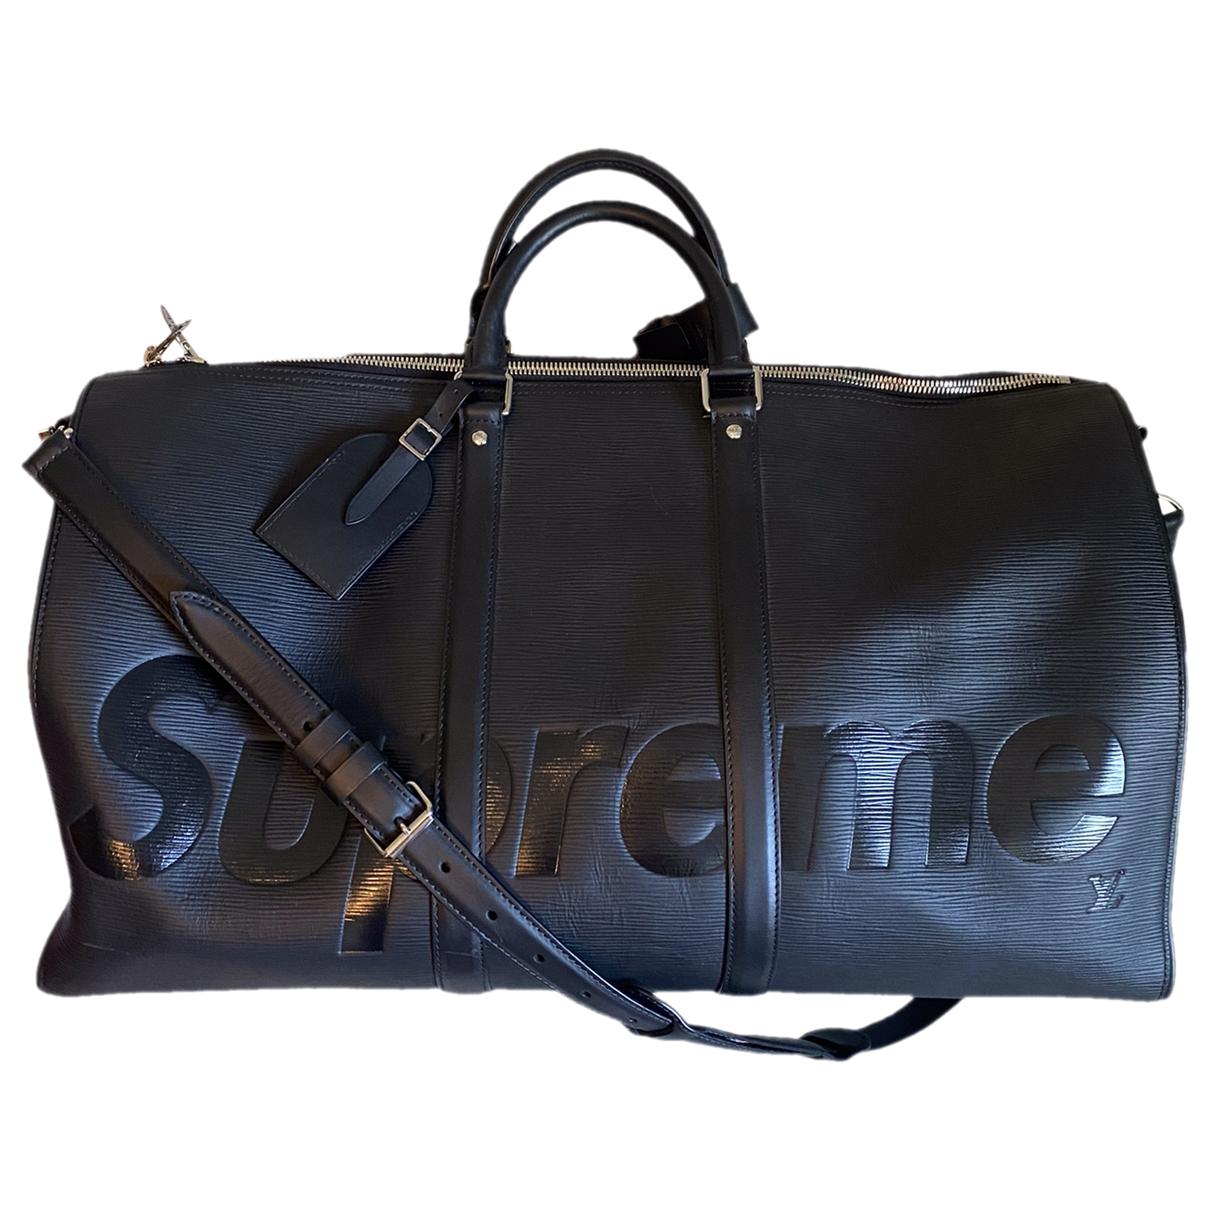 Louis Vuitton X Supreme 35cm backpack | MATCHES x Sellier